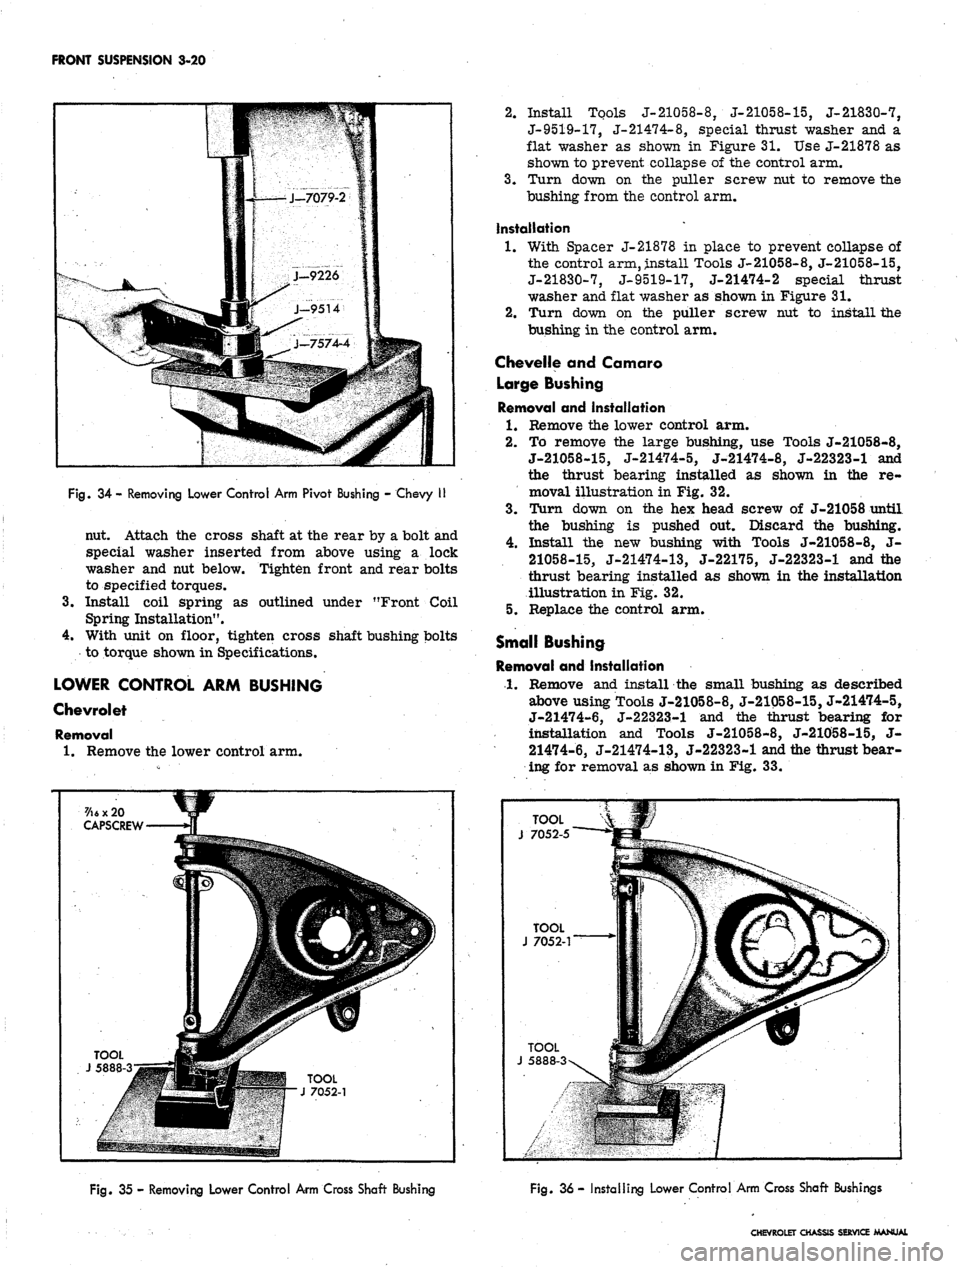 CHEVROLET CAMARO 1967 1.G Chassis Owners Manual 
FRONT SUSPENSION 3-20

Fig.
 34 - Removing Lower Control Arm Pivot Bushing - Chevy II

nut. Attach the cross shaft at the rear by a bolt and

special washer inserted from above using a lock

washer a